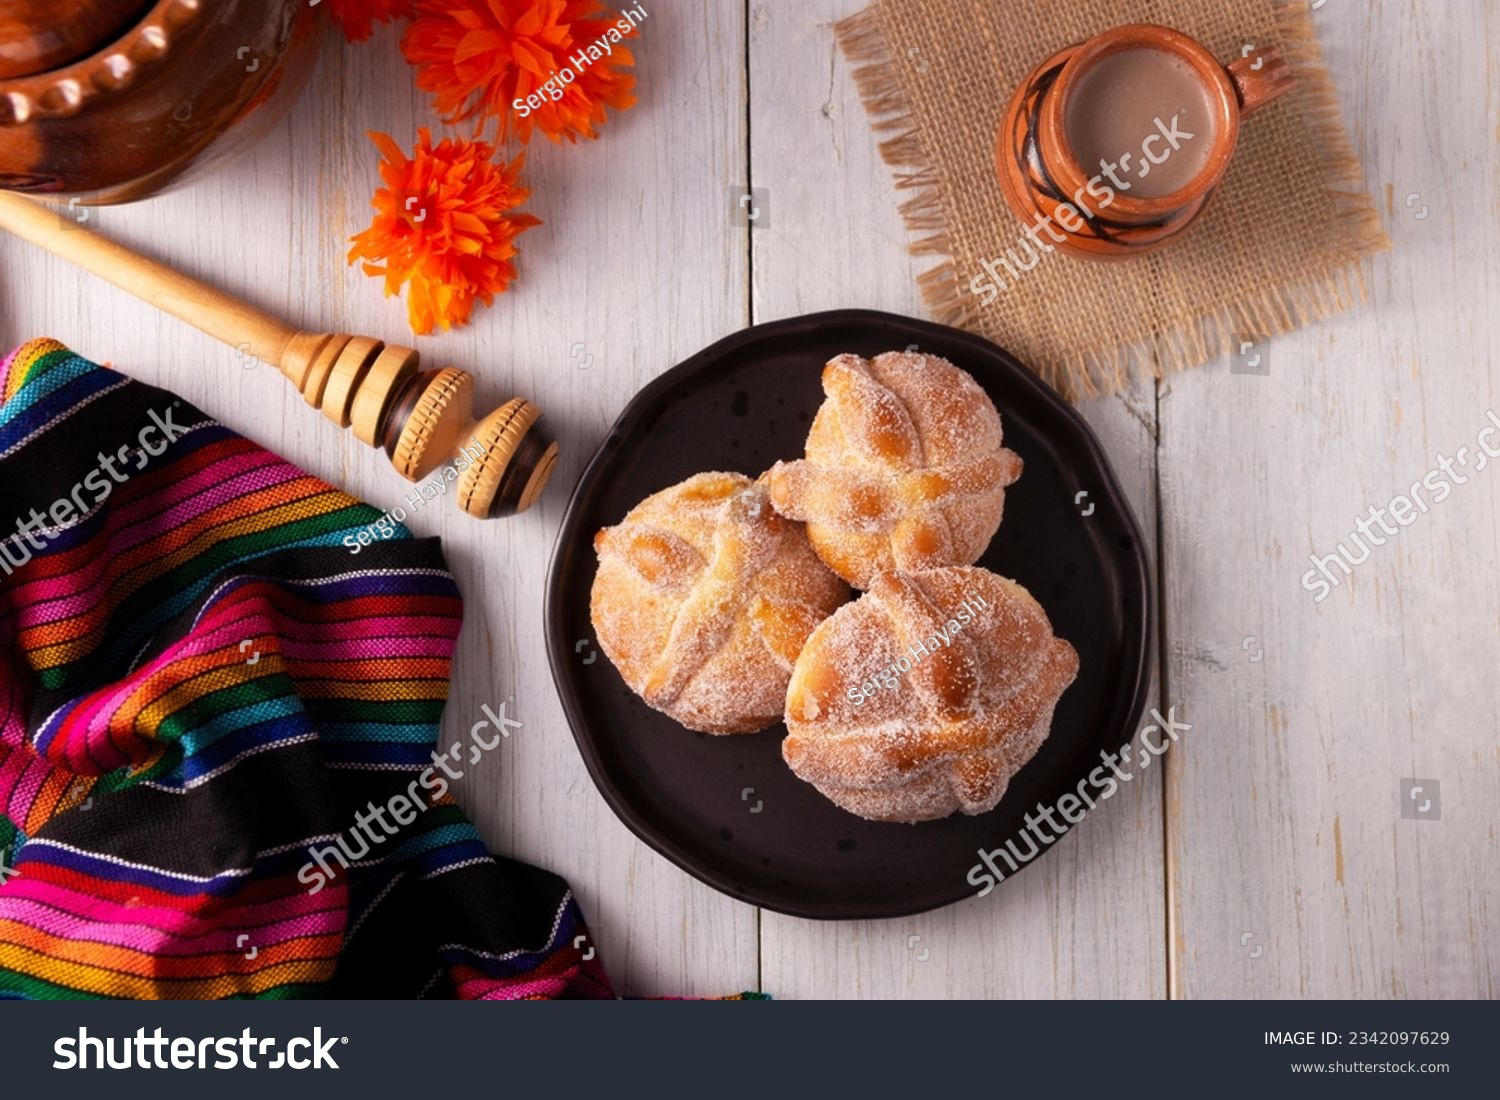 Pan de Muerto. Typical Mexican sweet bread that is consumed in the season of the day of the dead. It is a main element in the altars and offerings in the festivity of the day of the dead. #2342097629